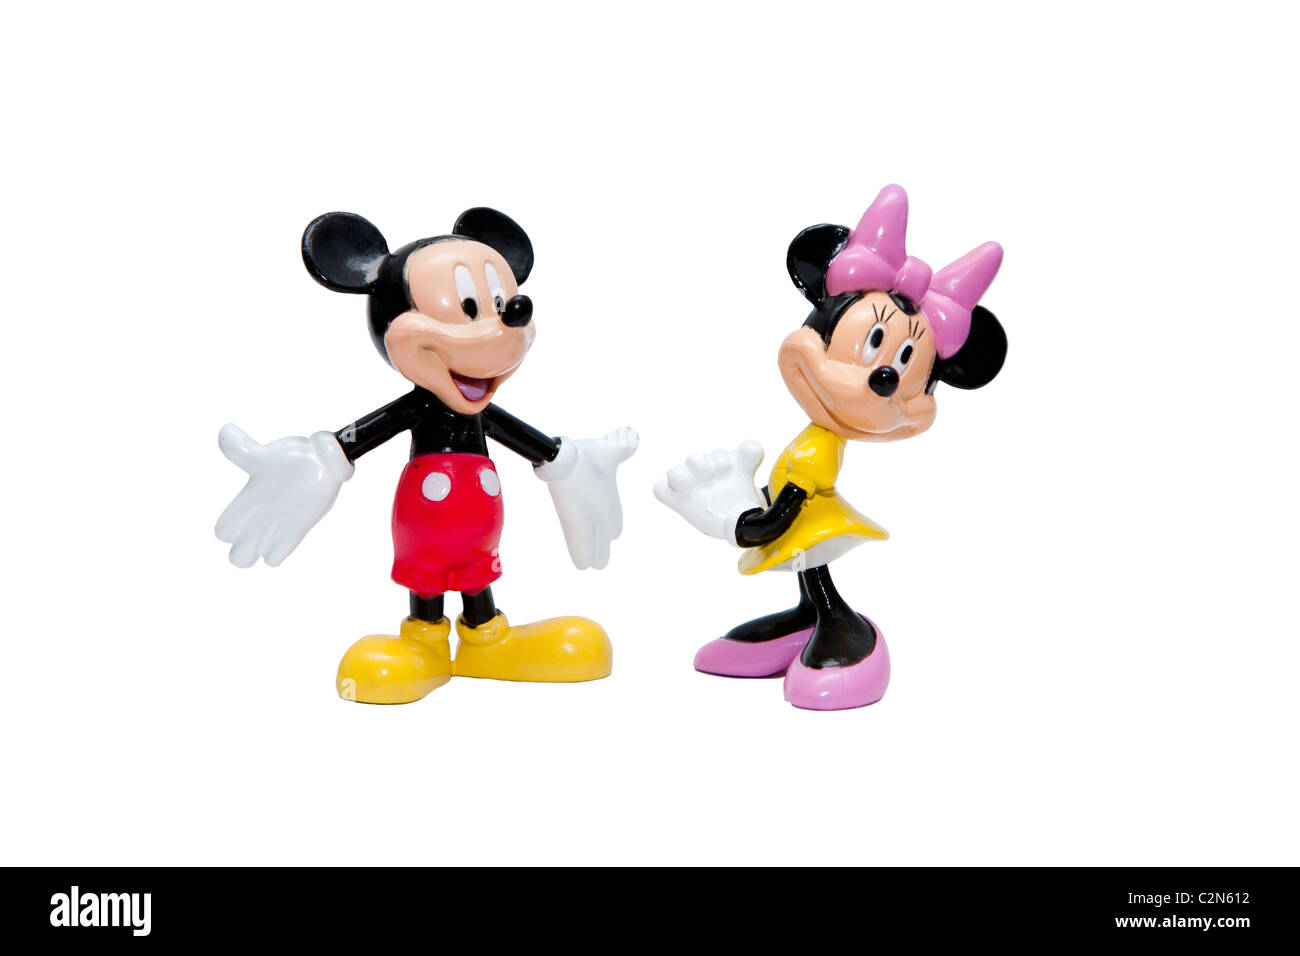 Micky and Minnie mouse cartoon puppets from Walt Disney, isolated. Stock Photo